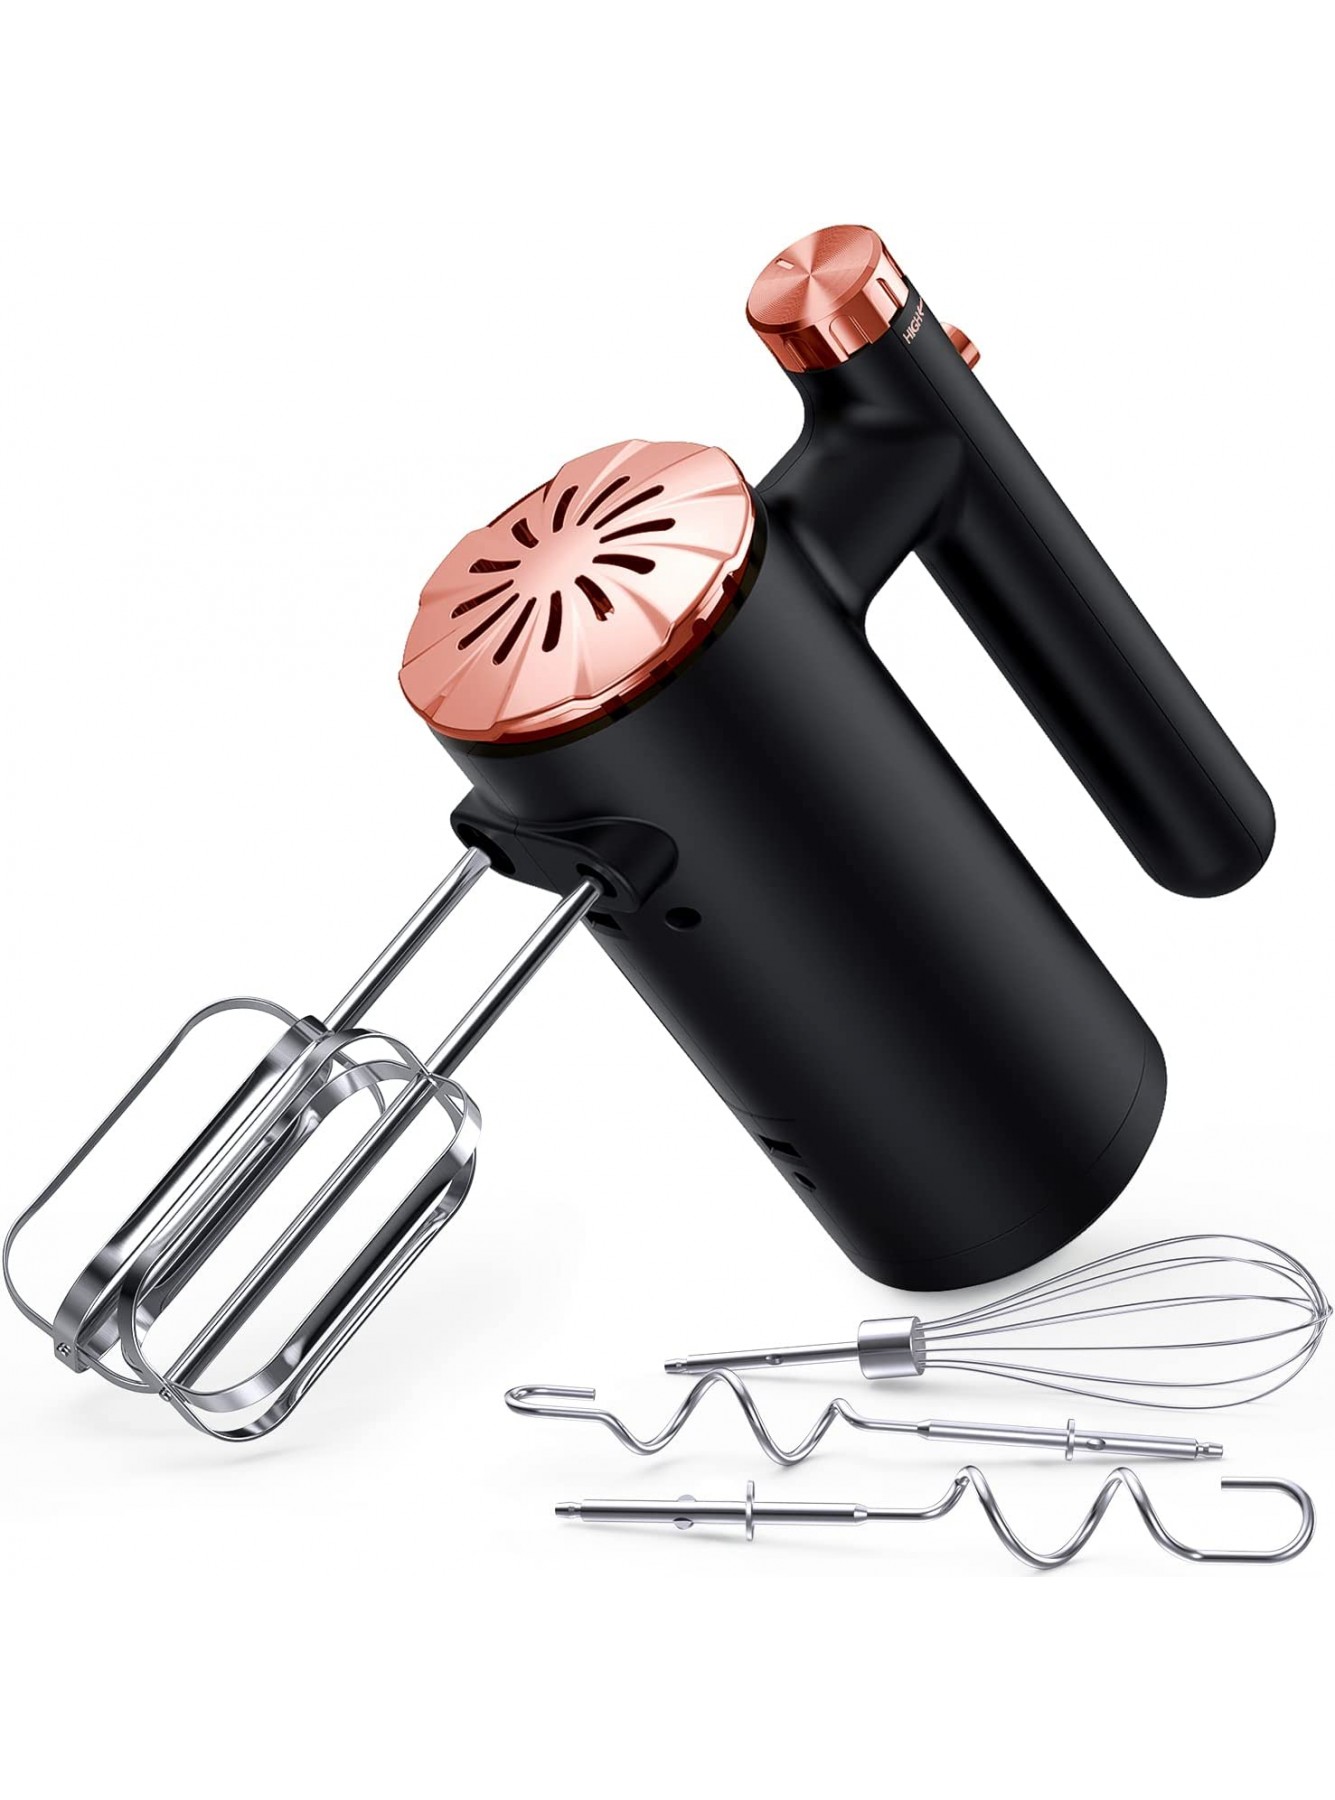 Hand Mixer Electric 500W Ultra Handheld Mixer with Continuous Variable Speed Kitchen Mixer + One-Button Pop-UP + 5 Stainless Steel Accessories Food Mixer Easily Whipping Cream Black+Rose Gold B0995DMKR6